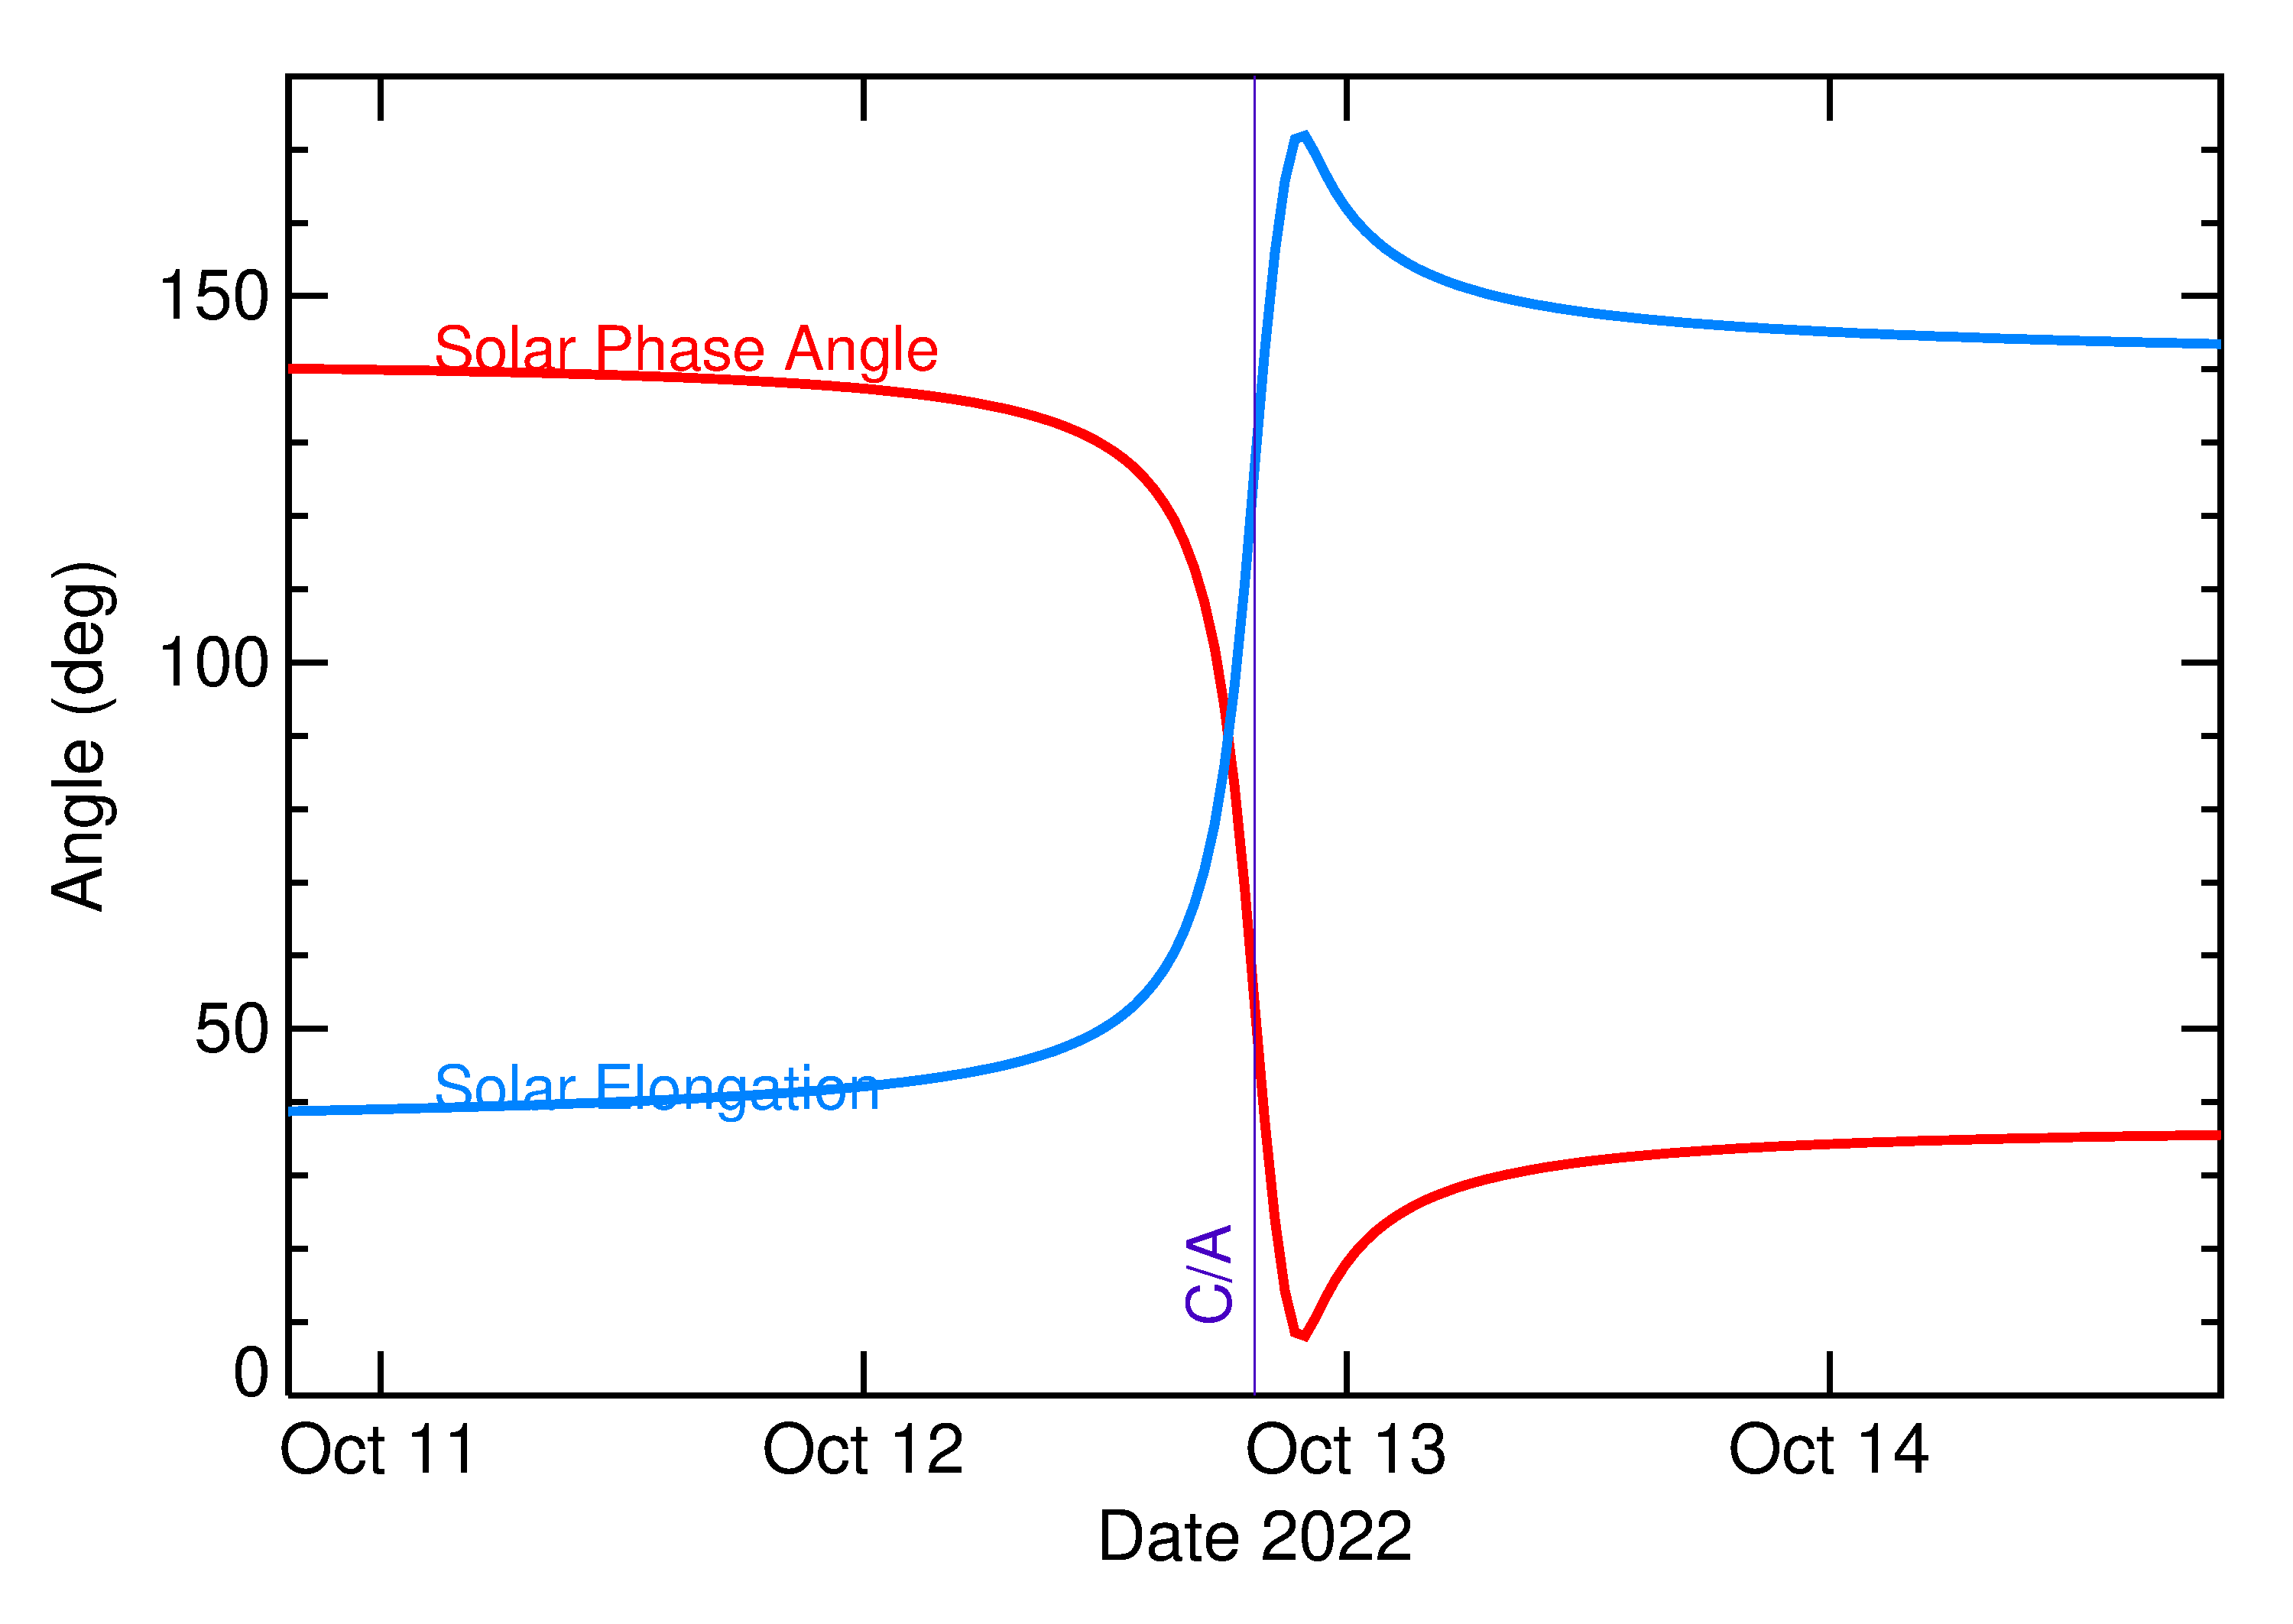 Solar Elongation and Solar Phase Angle of 2022 TY3 in the days around closest approach